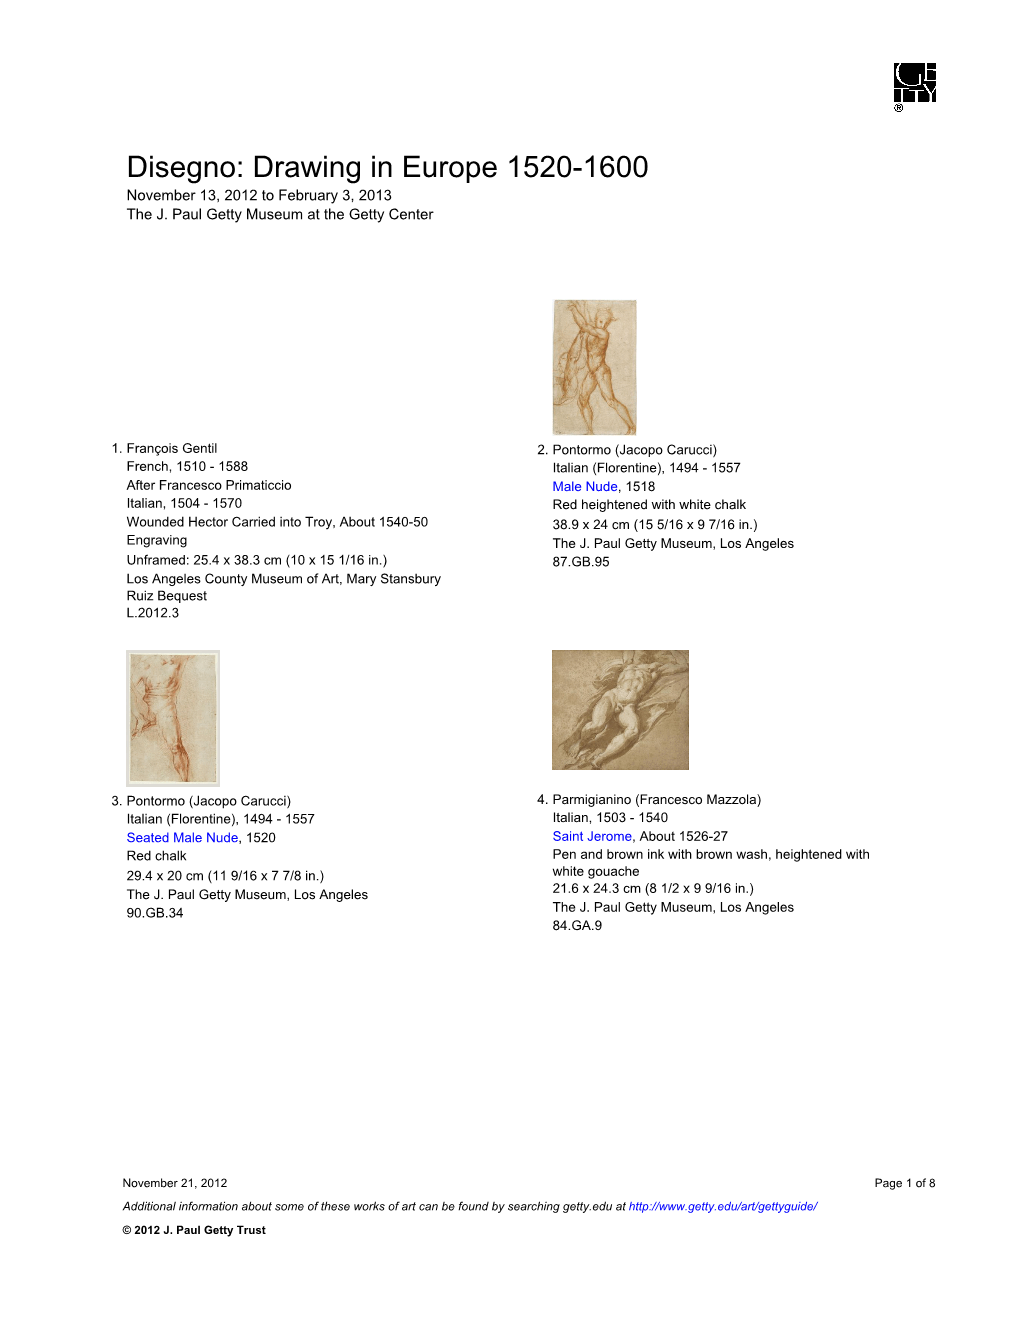 Disegno: Drawing in Europe 1520-1600 November 13, 2012 to February 3, 2013 the J